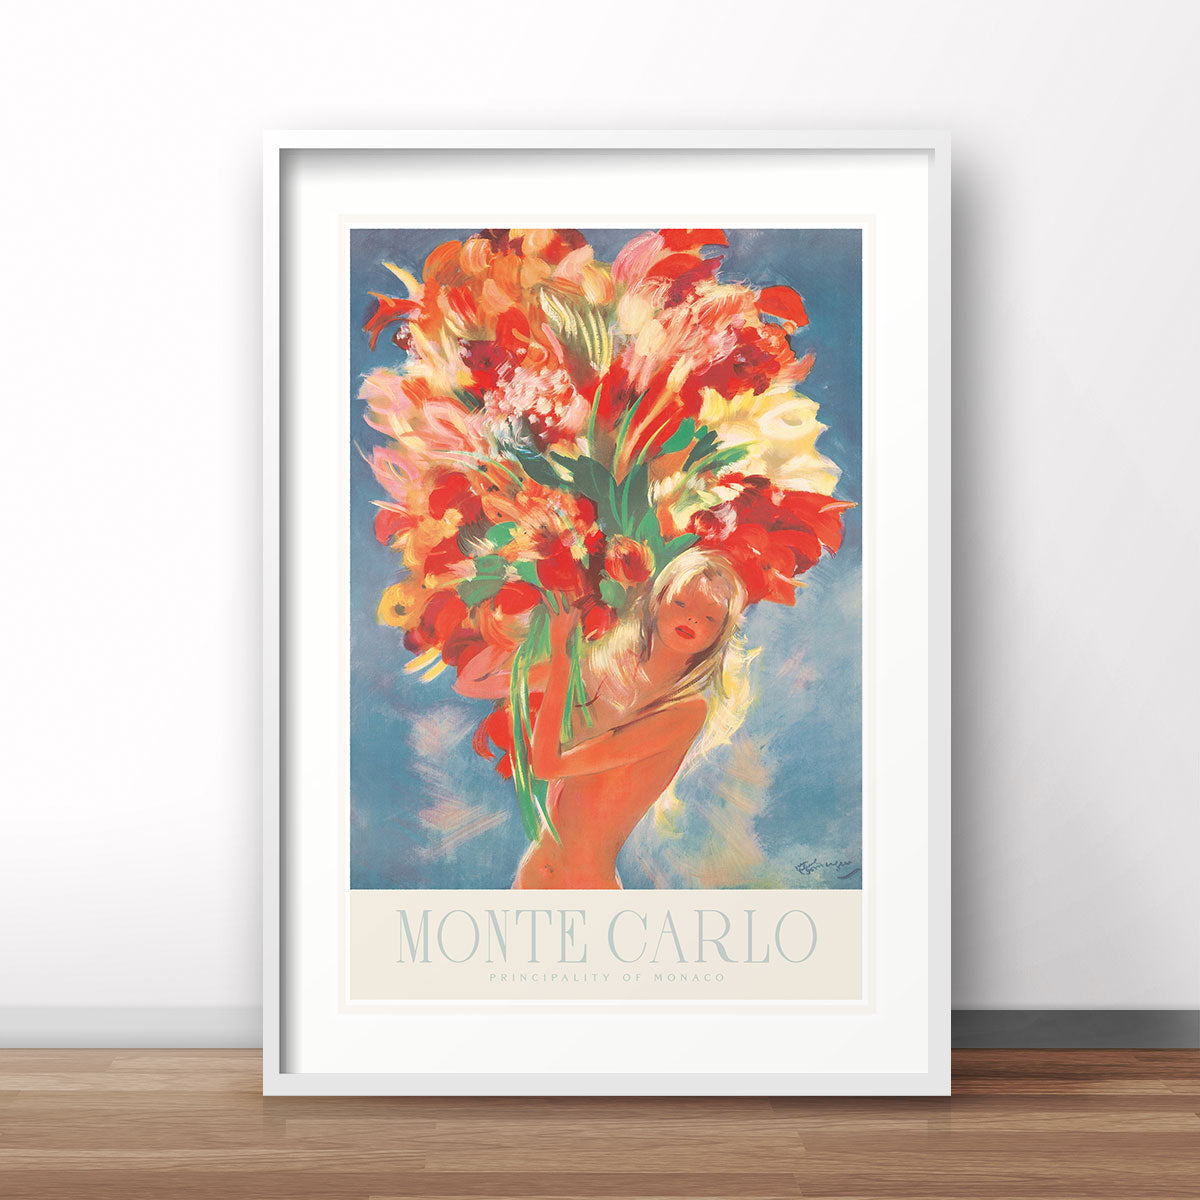 Monte Carlo Flowers retro vintage travel poster print from Places We Luv